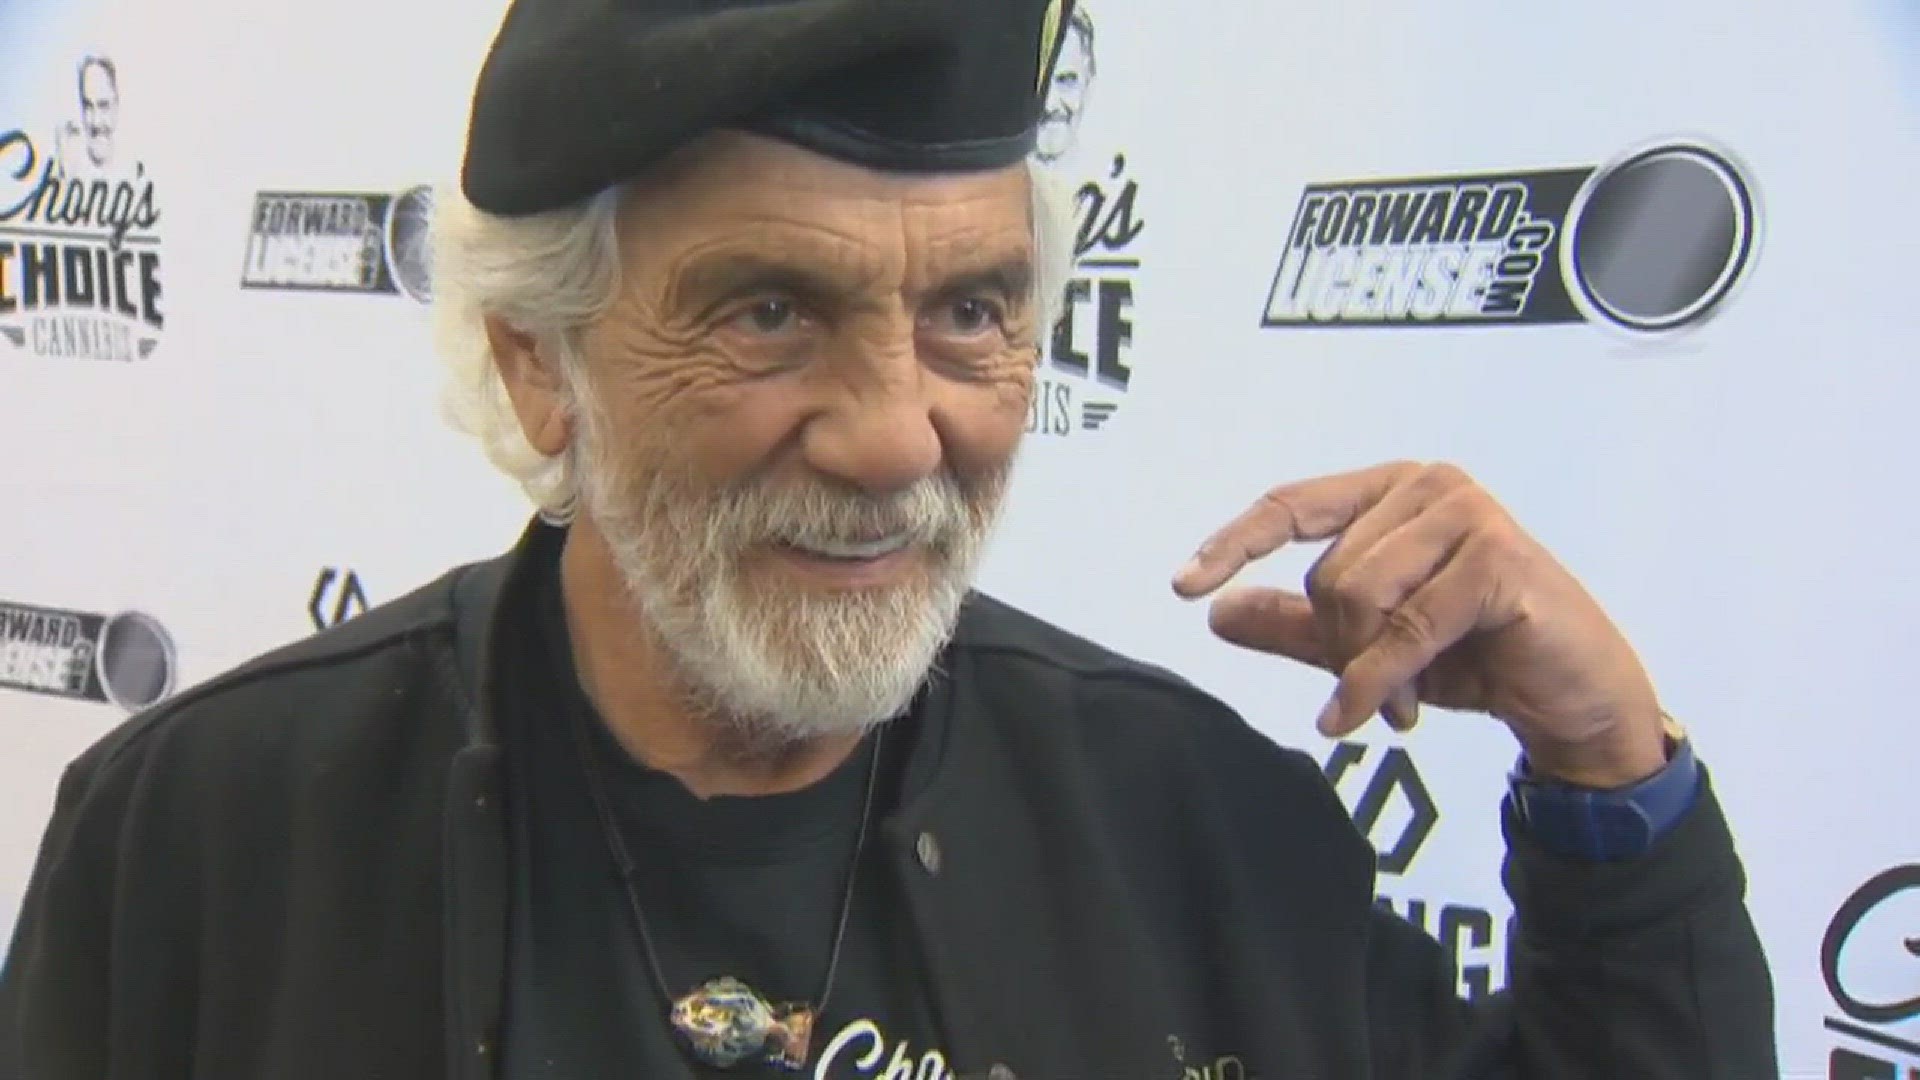 Tommy Chong promotes pot line in Portland